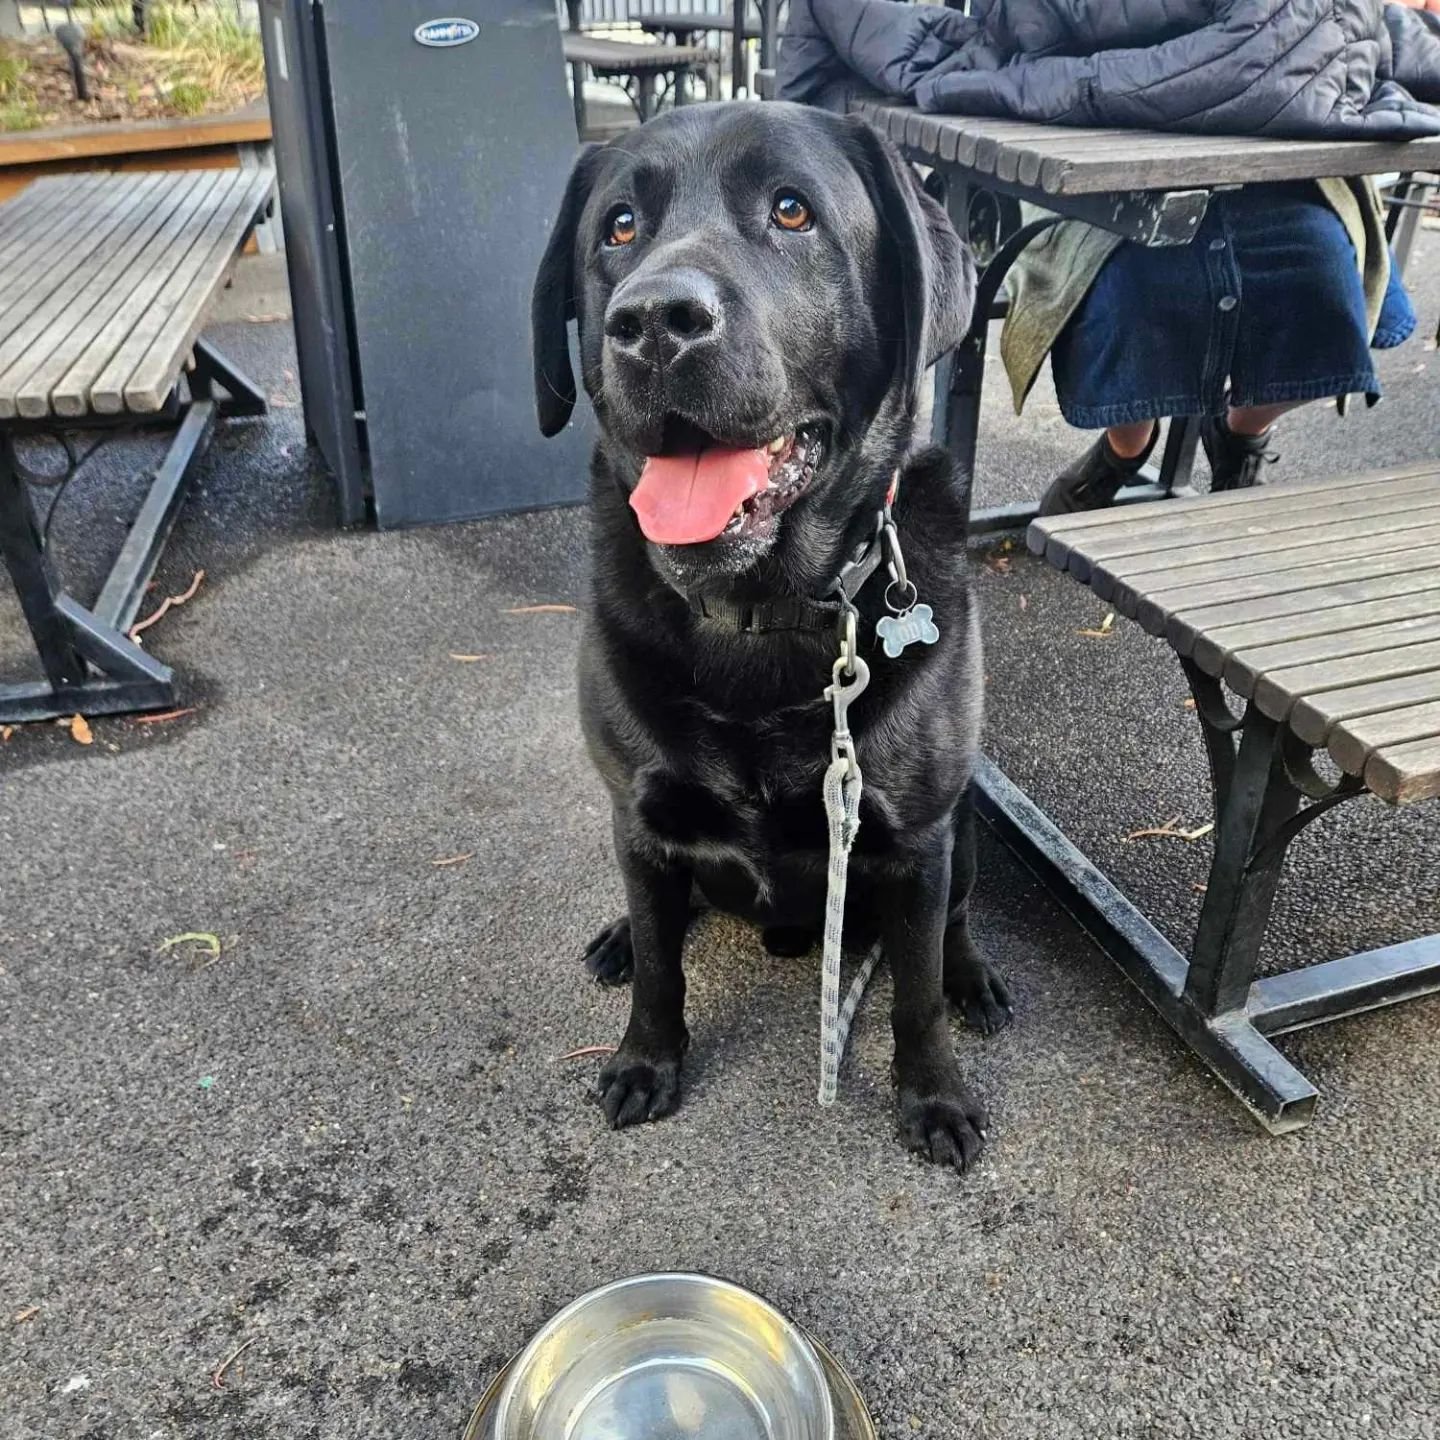 Dogs of the Star Hotel! 🐕

Your dogs are always welcome in our beer garden! Bring them down today for bottomless water bowls and maybe a cheeky nugget or two!

#dogsofthestarhotel #dogfriendly #dogfriendlypub #starhotelsale #themiddleofeverywhere #g